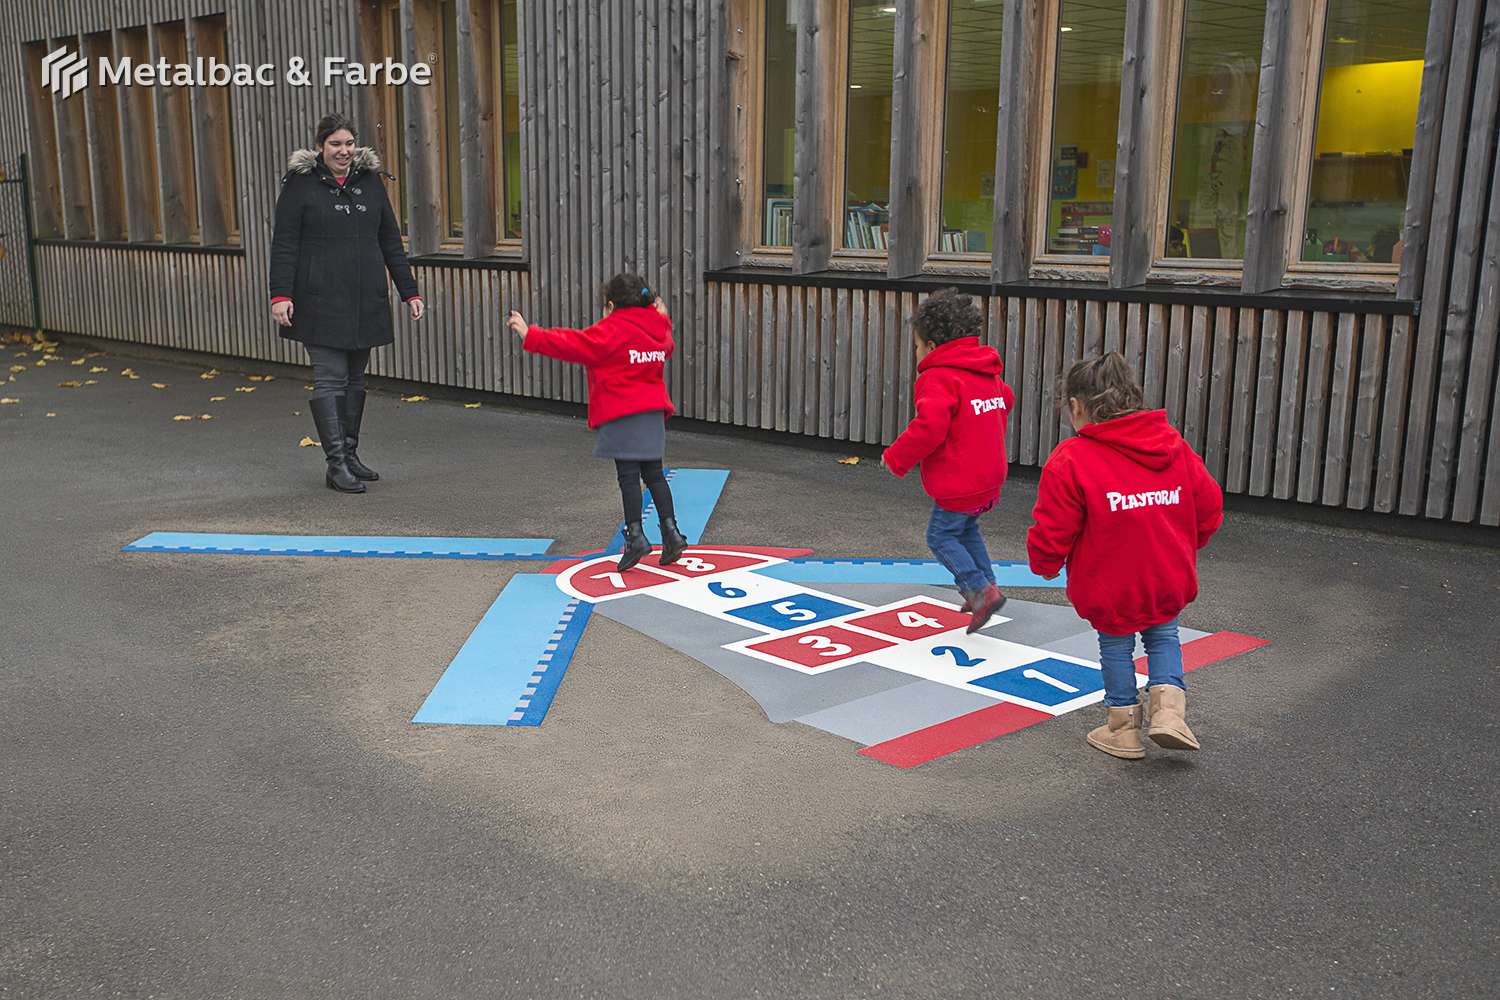 playground markings games; playground games for kids; outdoor play; math games; school yard games; educational games; asphalt games; interactive games; road markings signs; road traffic signs; company logos; snake games; maze games